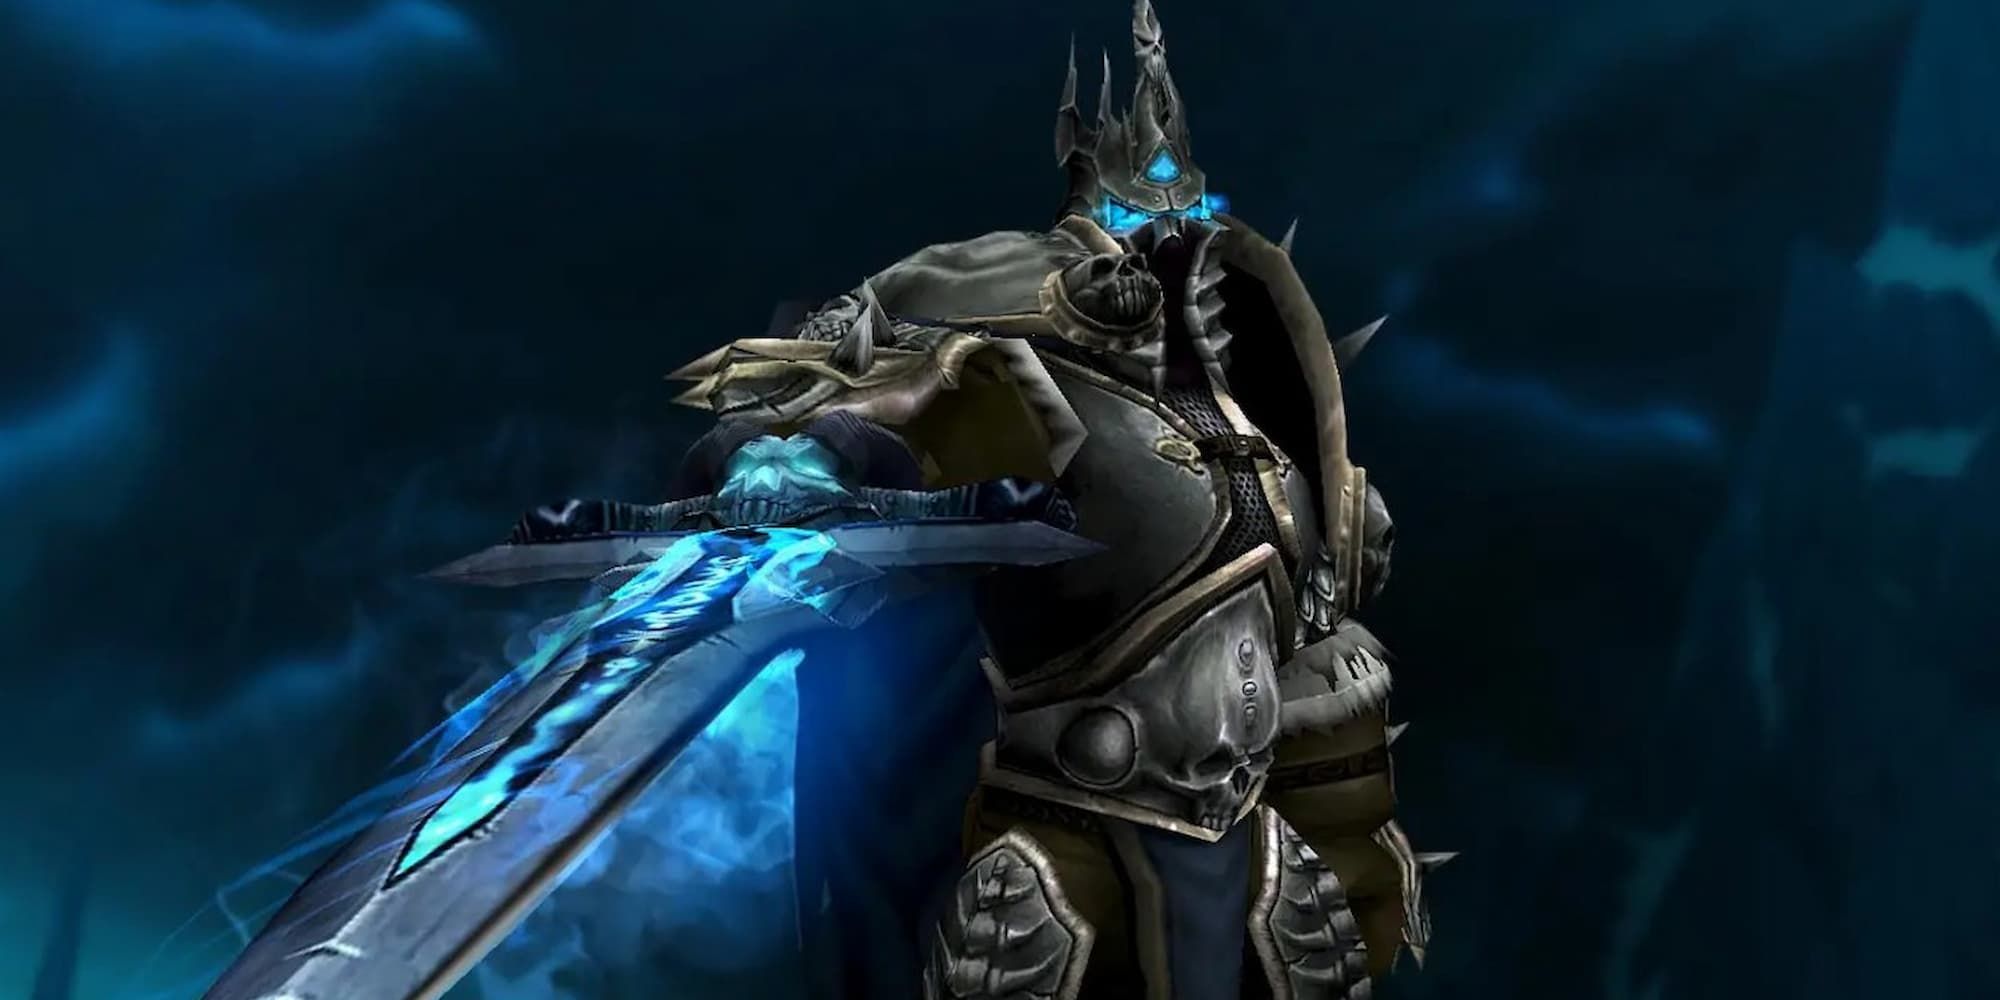 The Lich King's imposing figure stands tall and points his sword towards his adversary.